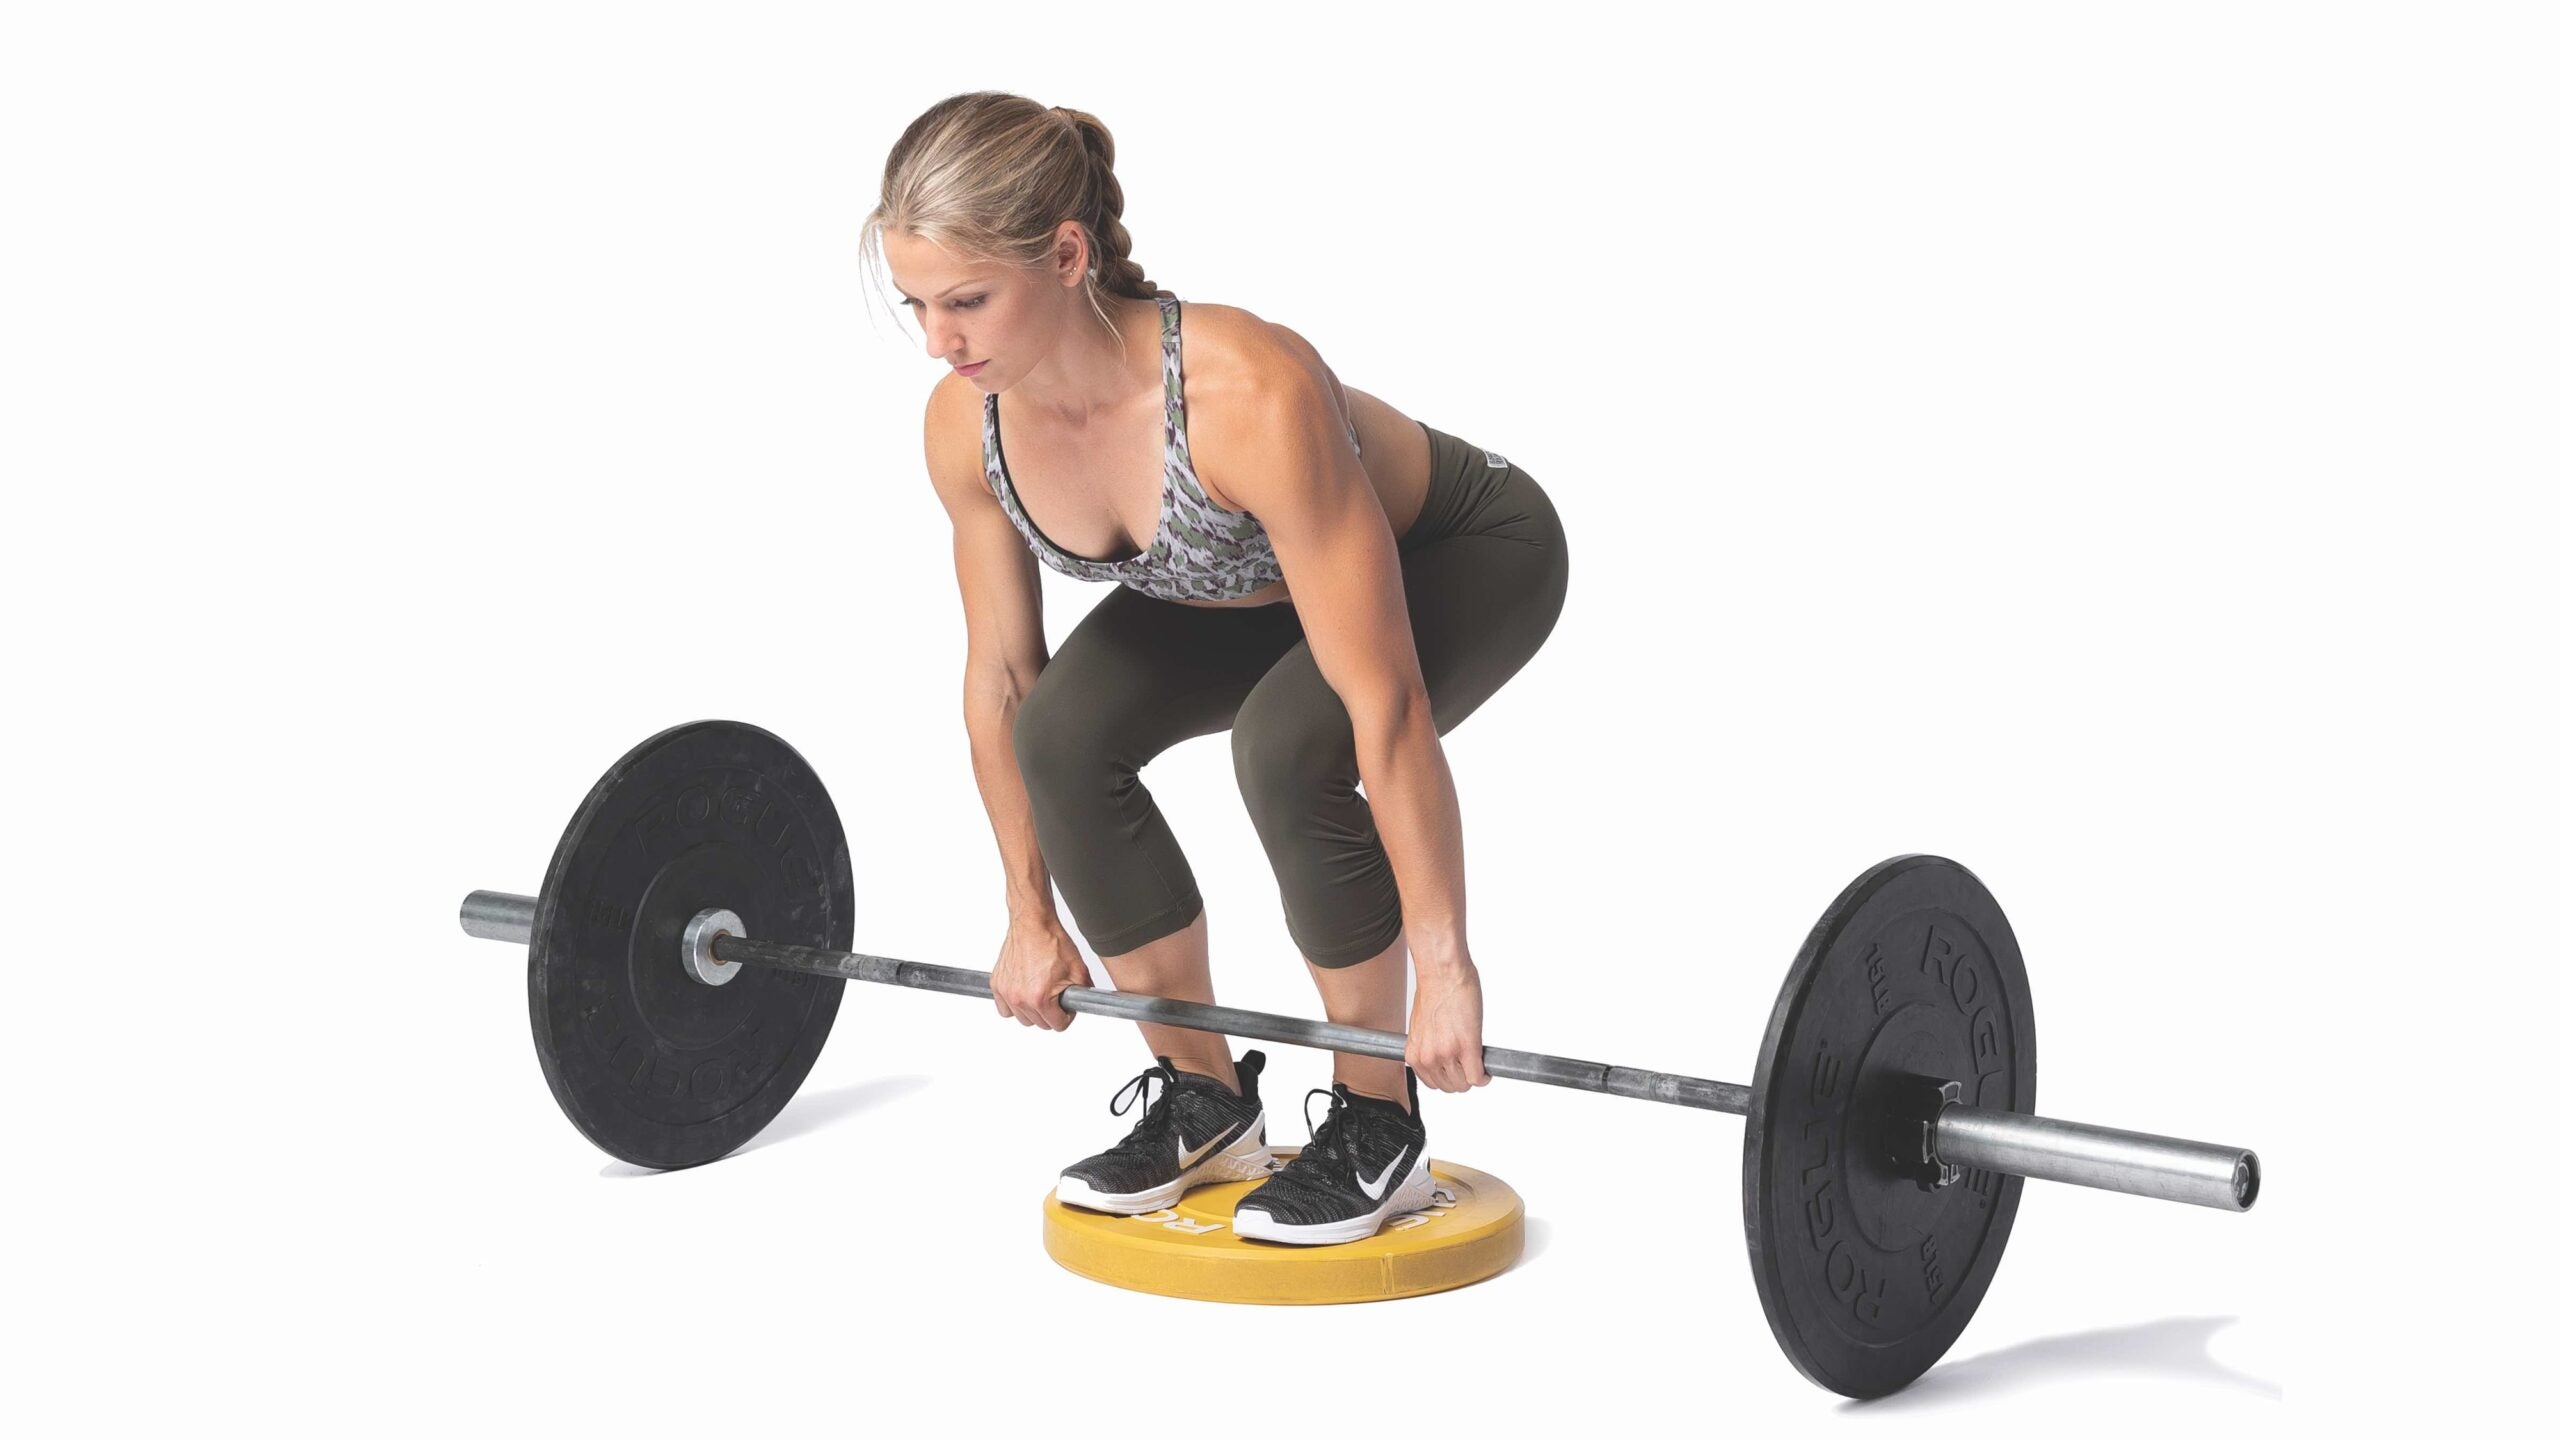 How to do a Sumo Deadlift, Form & Benefits, Legs and Glutes Exercises